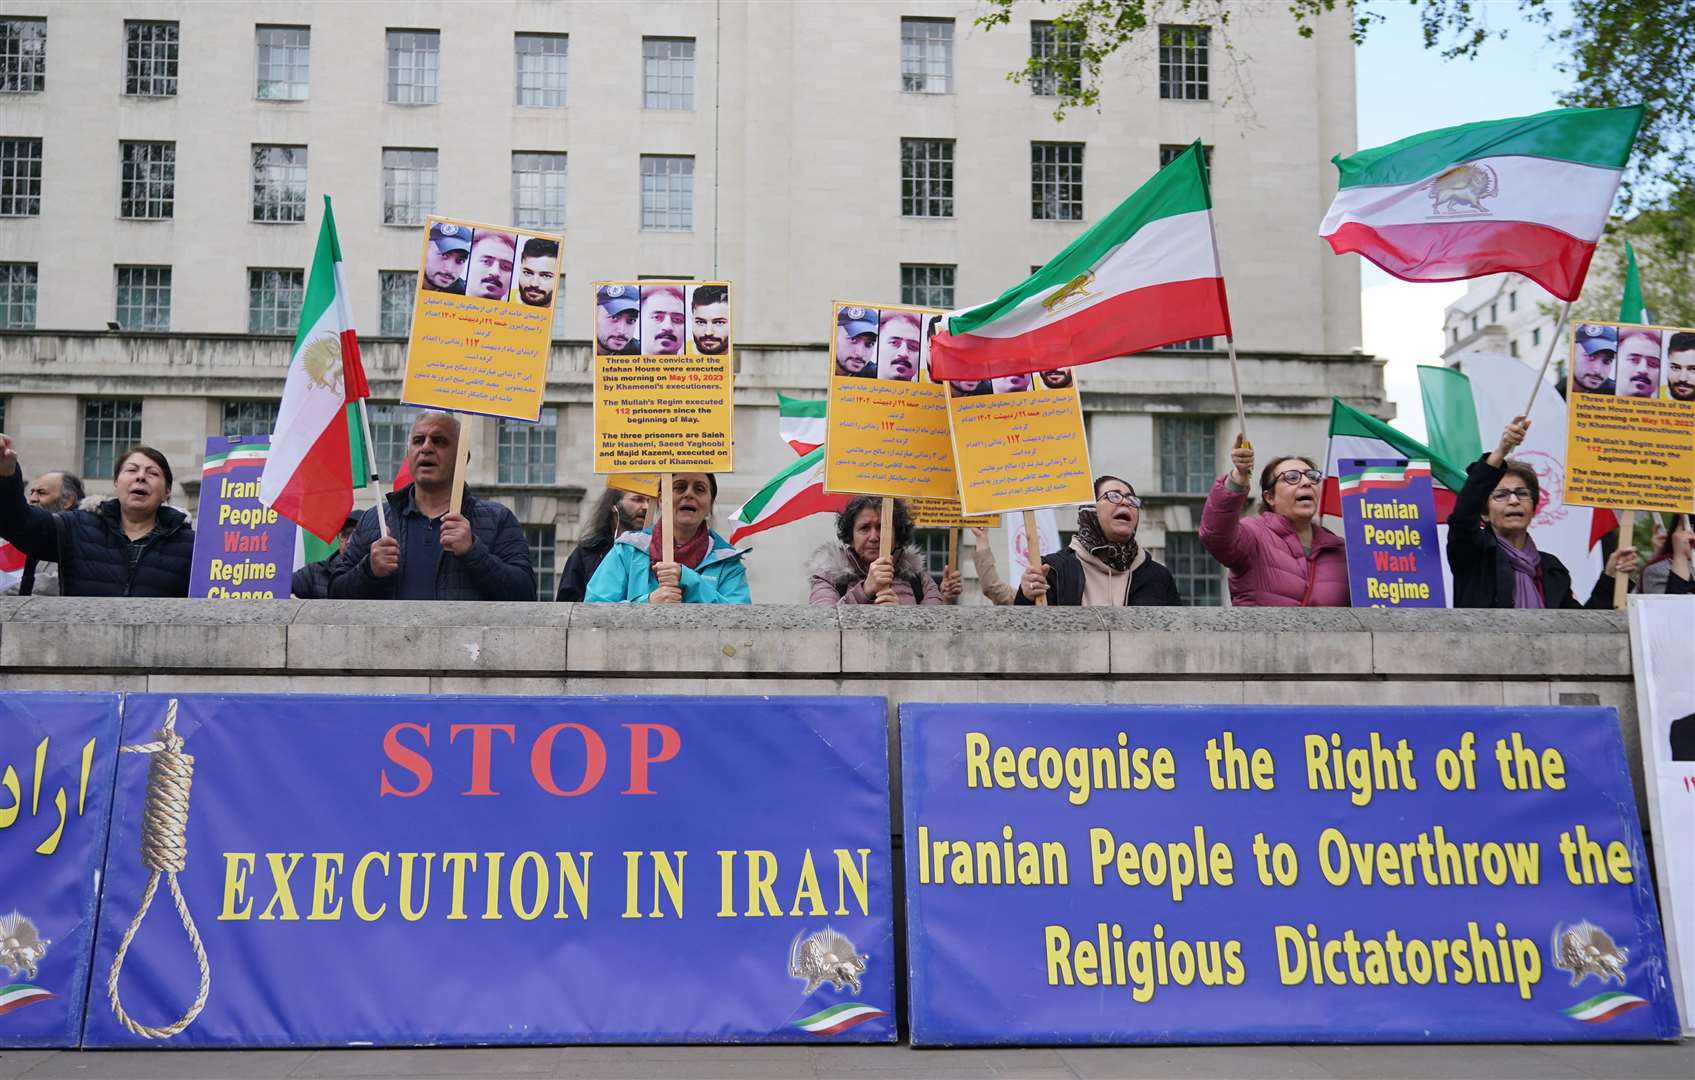 The protest took place on the same day authorities in Iran executed three men (Yui Mok/PA)